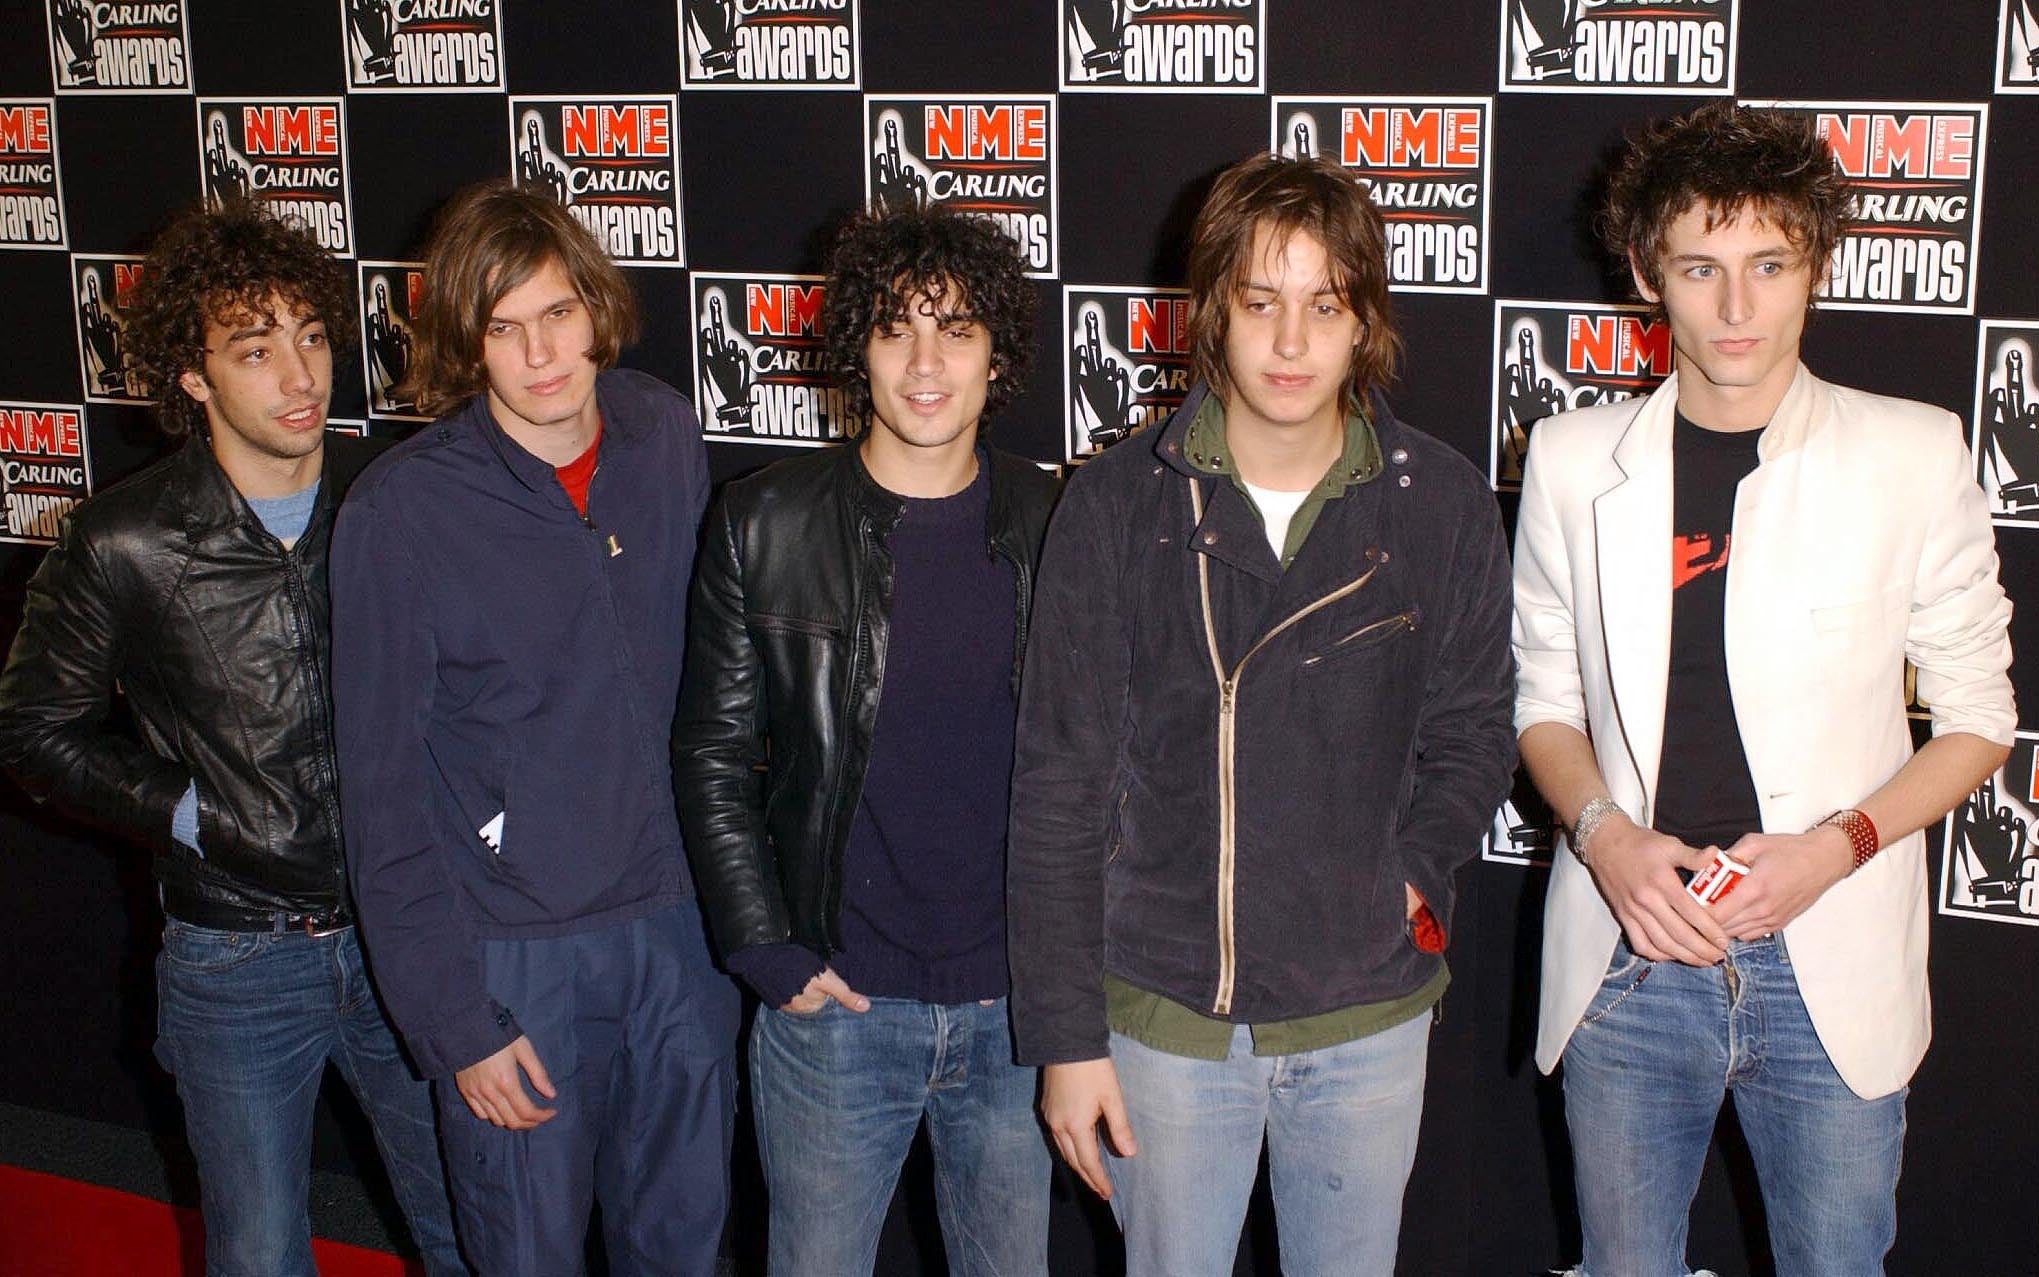 Famous Five: The Strokes were snapped up by UK label Rough Trade in 2001